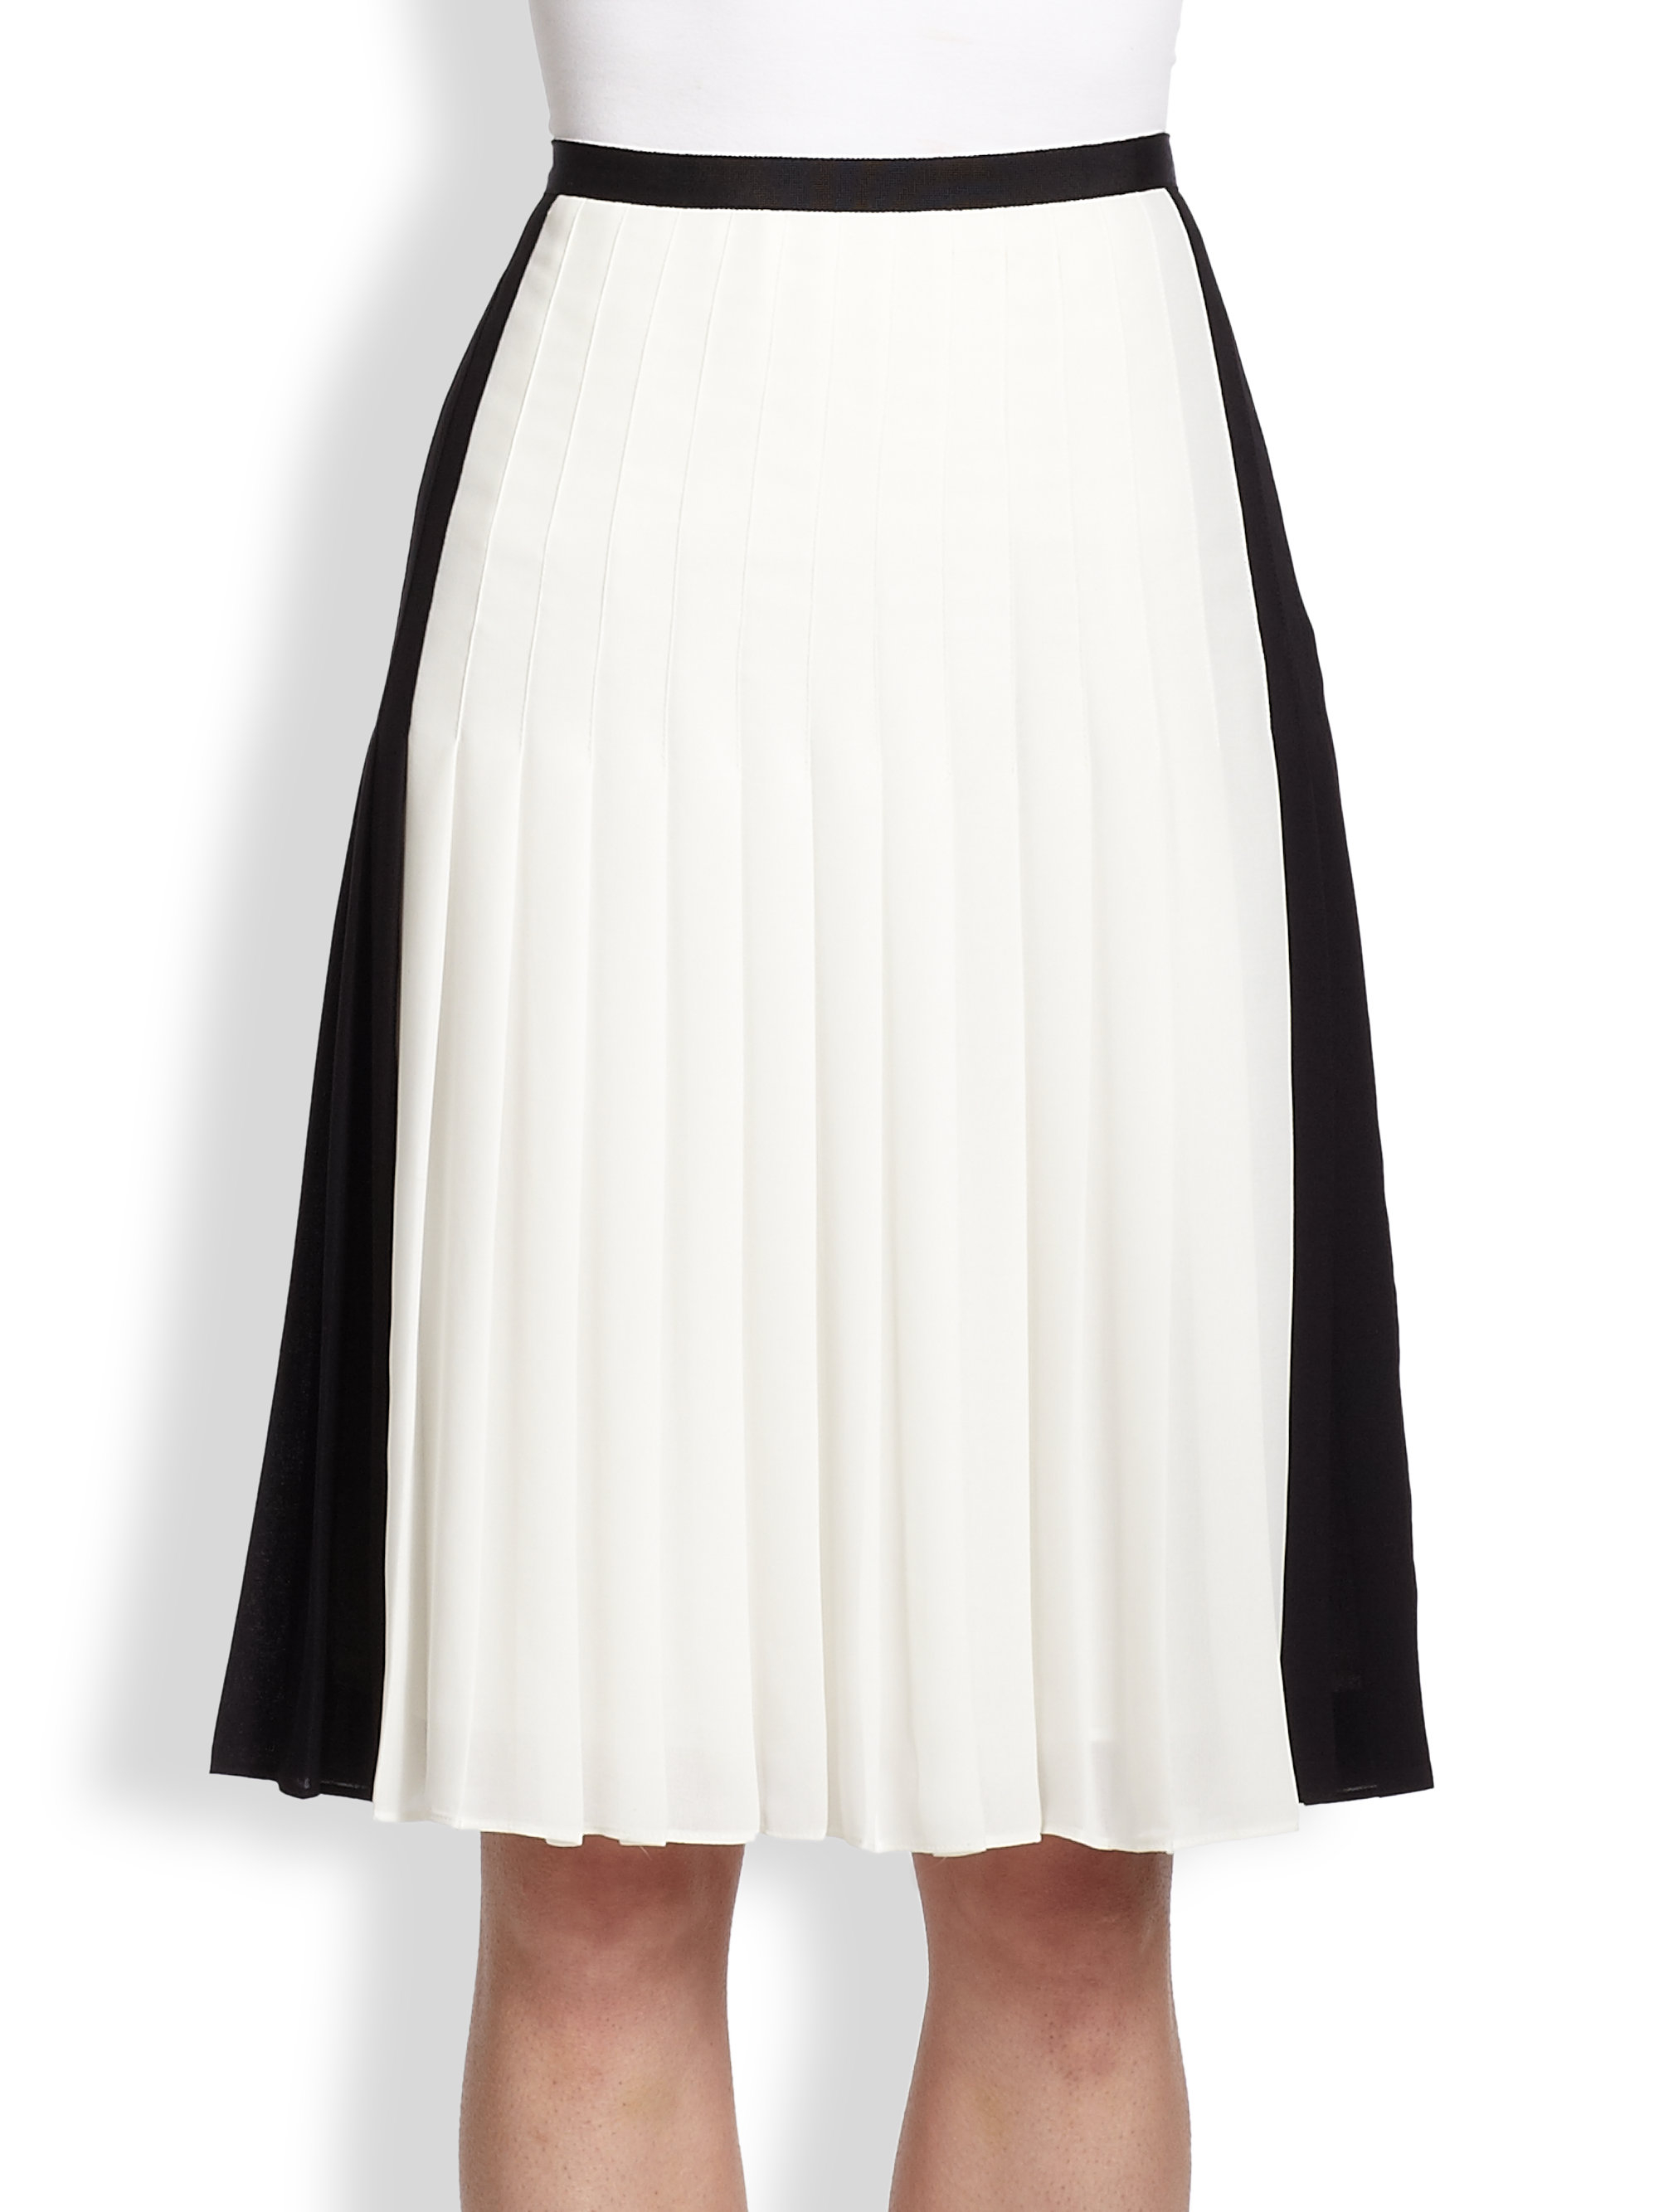 Vince Two-Tone Pleated Skirt in Black - Lyst